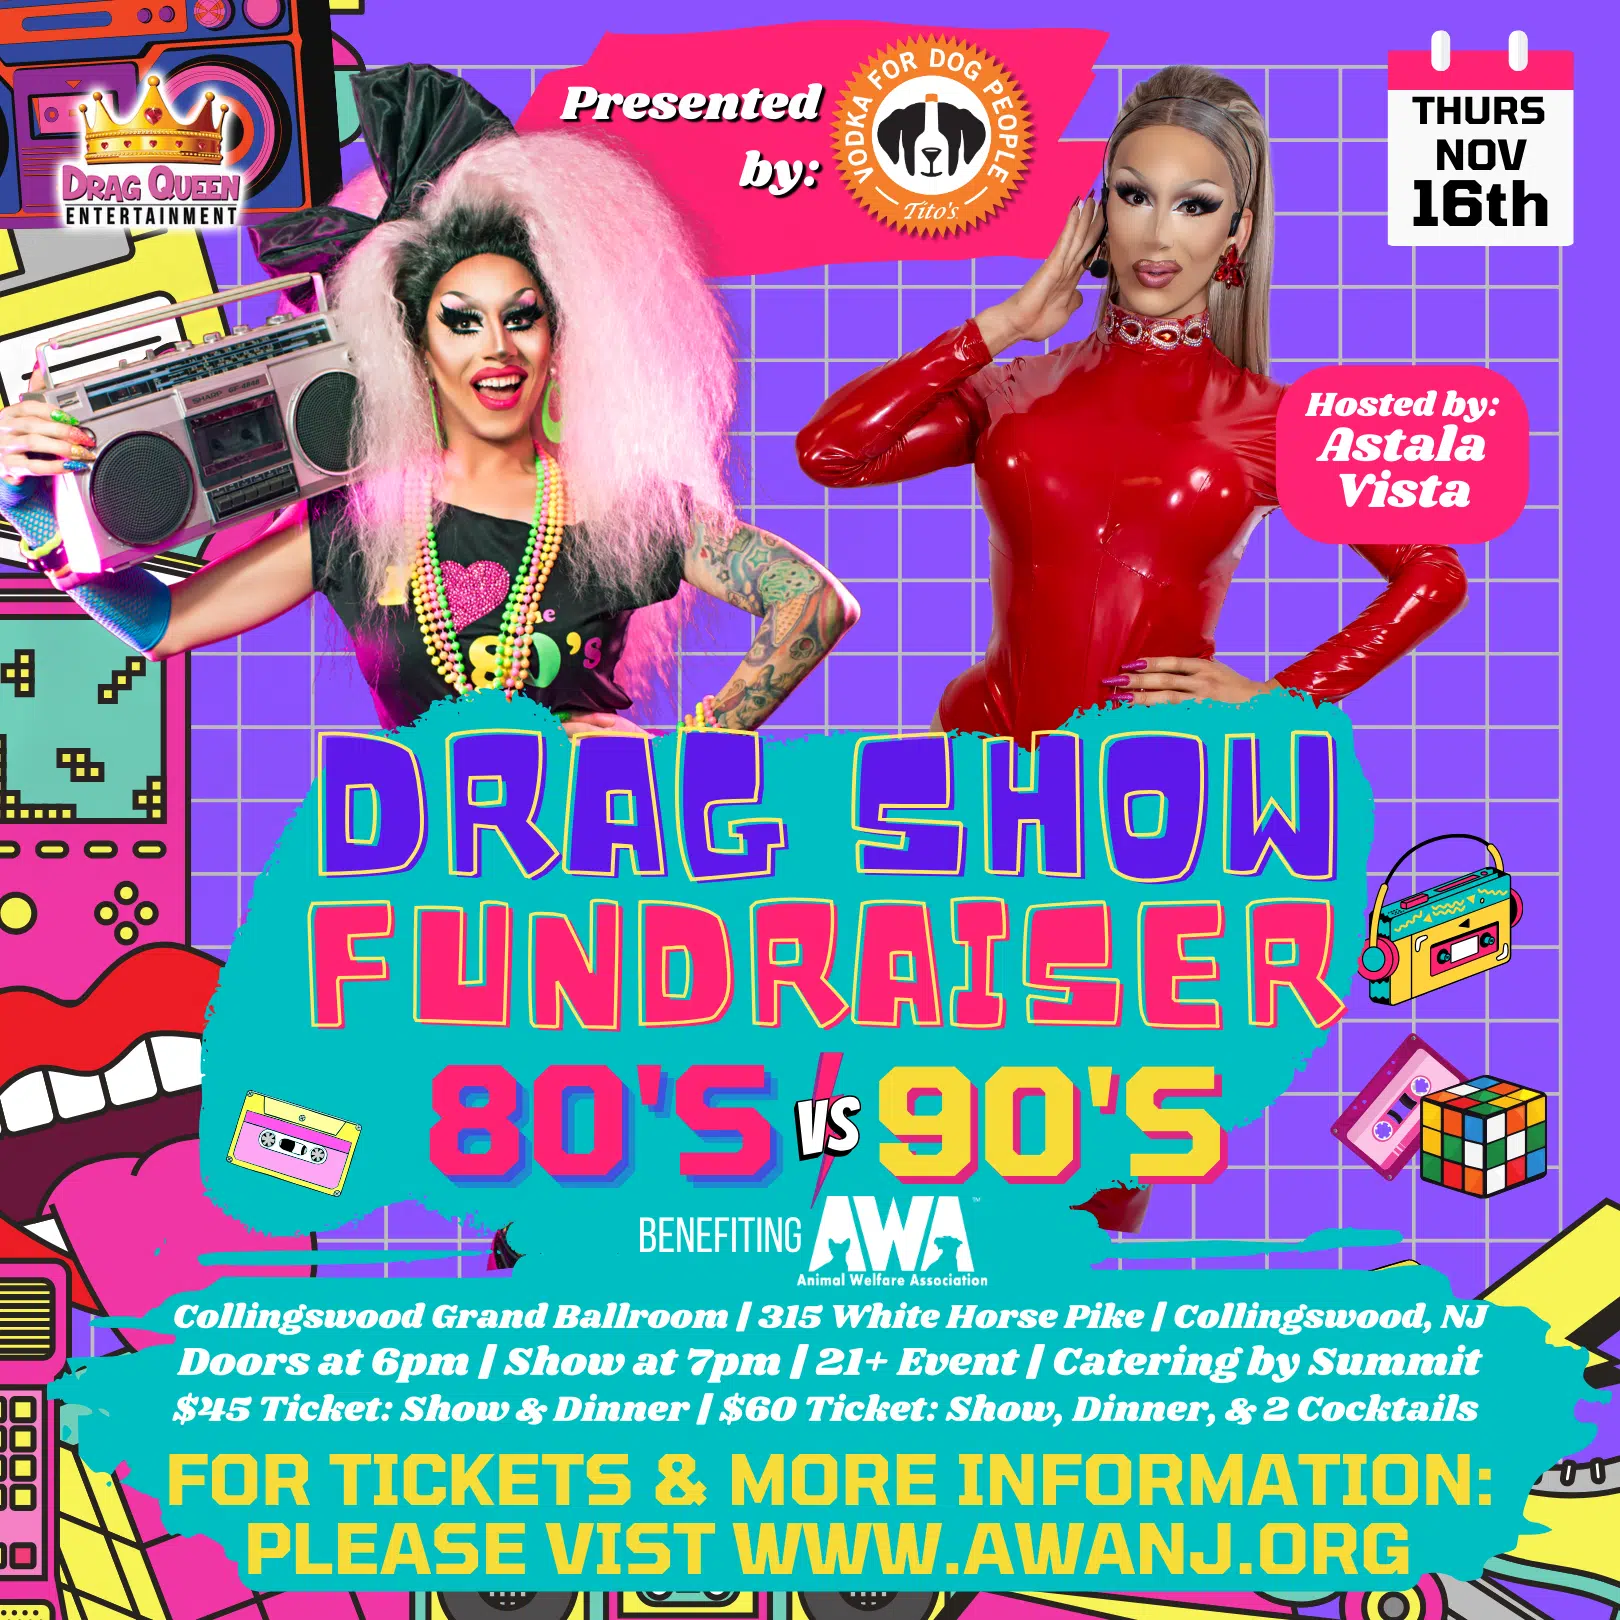 Flyer with 2 drag queens promoting Animal Welfare Association's 80s vs 90s drag show fundraiser.